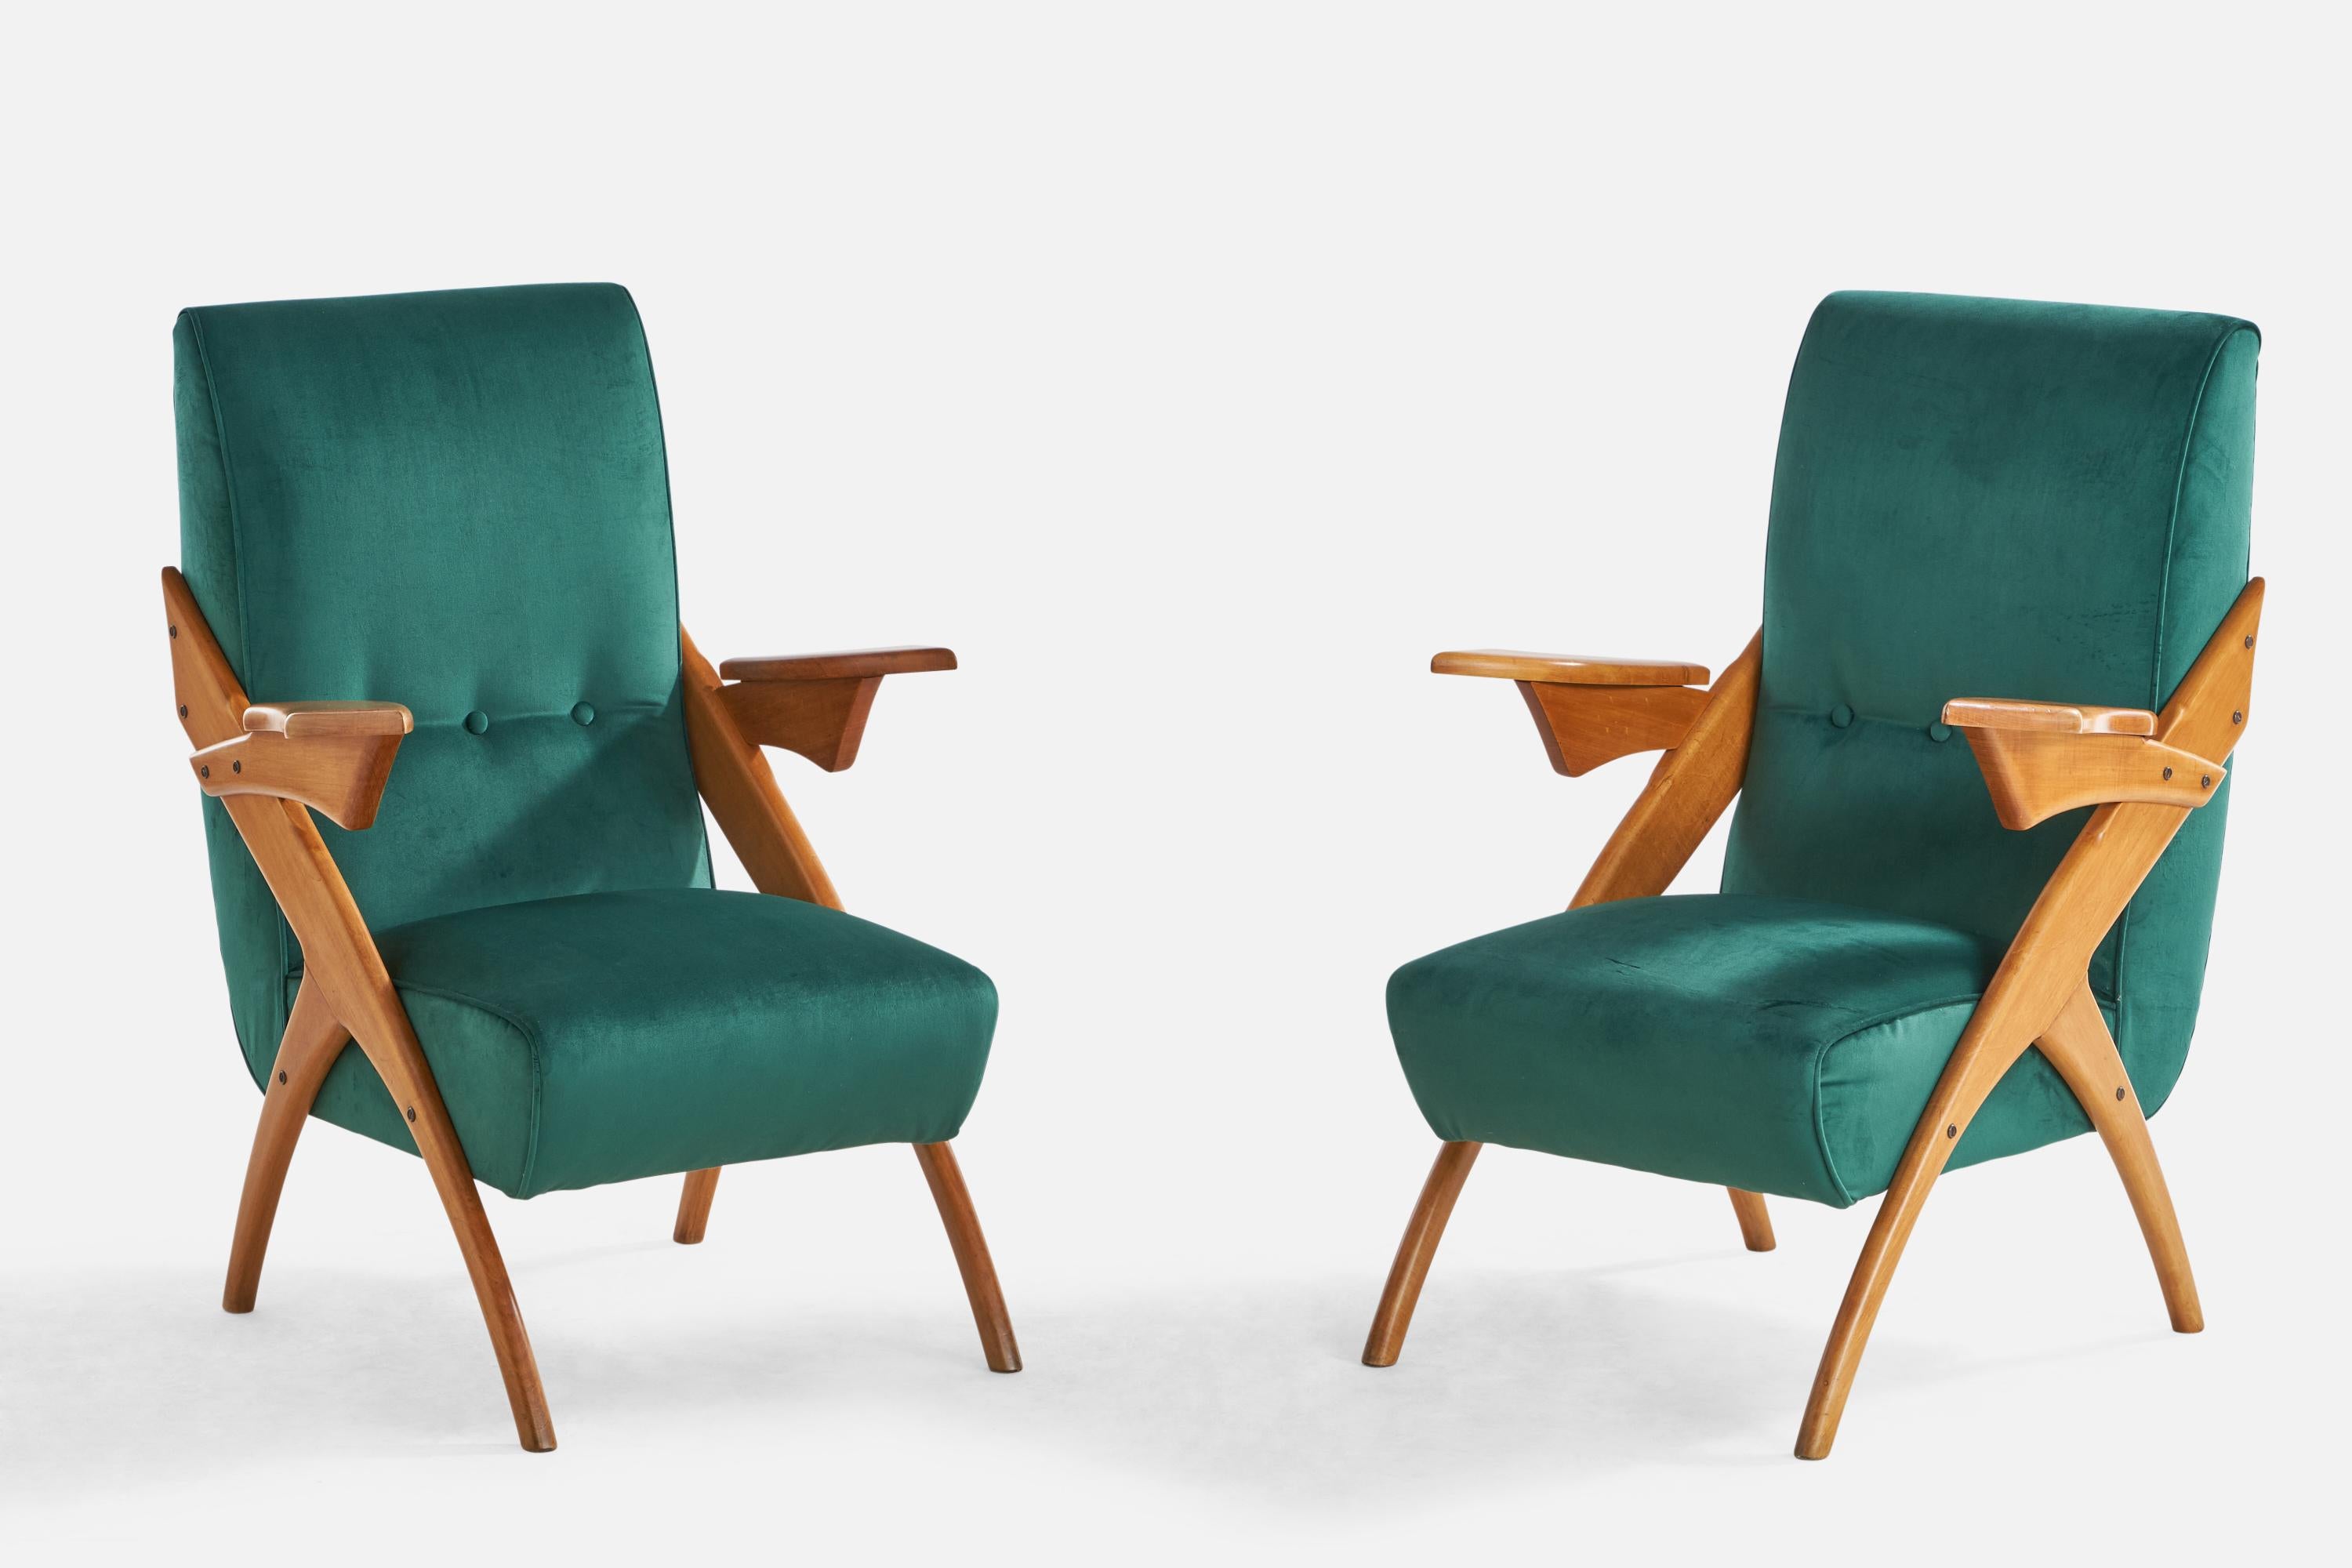 A pair of wood and blue velvet lounge chairs designed and produced in Argentina, 1950s.

Seat height: 15”
